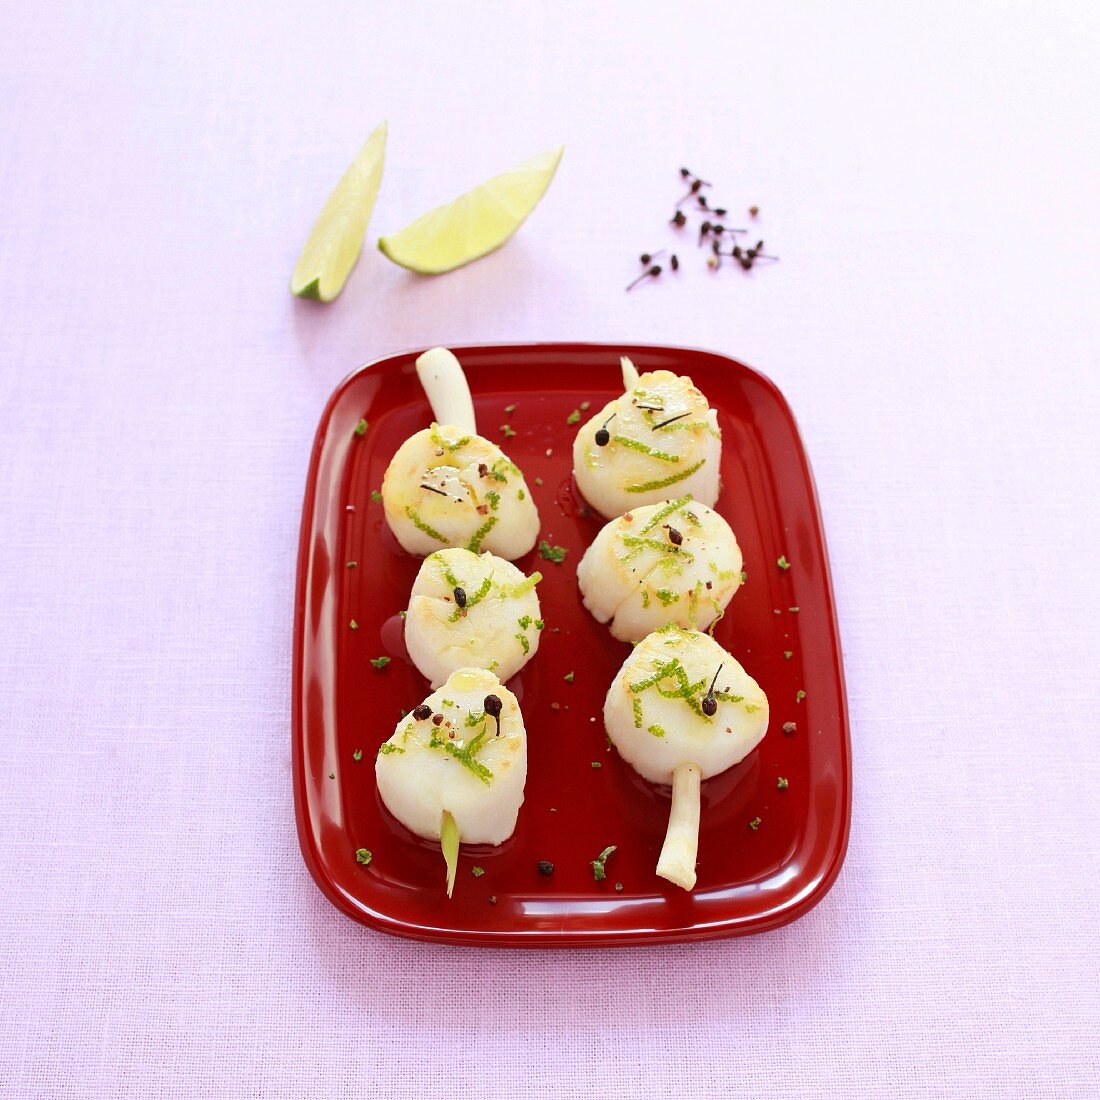 Scallop brochettes with lime and pepper on a citronella stalk